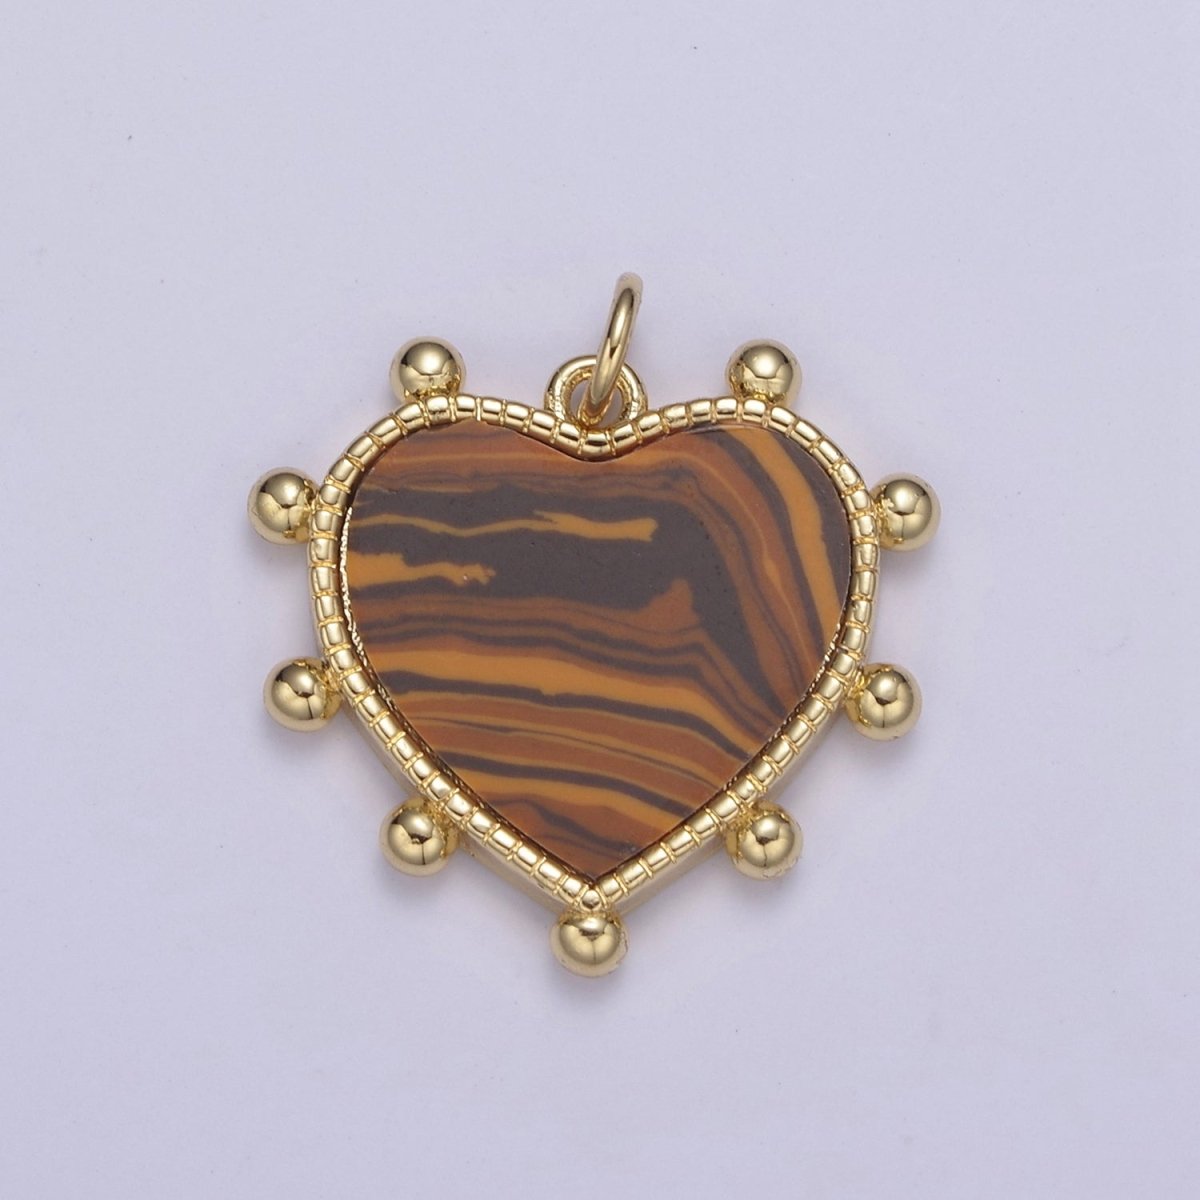 14K Gold Filled Pearl, Tiger Eye, Turquoise Abalone Shell Charm Pendant Beaded Heart Love Charm for Necklace Bracelet Jewelry Making N-642 - N-646 - DLUXCA